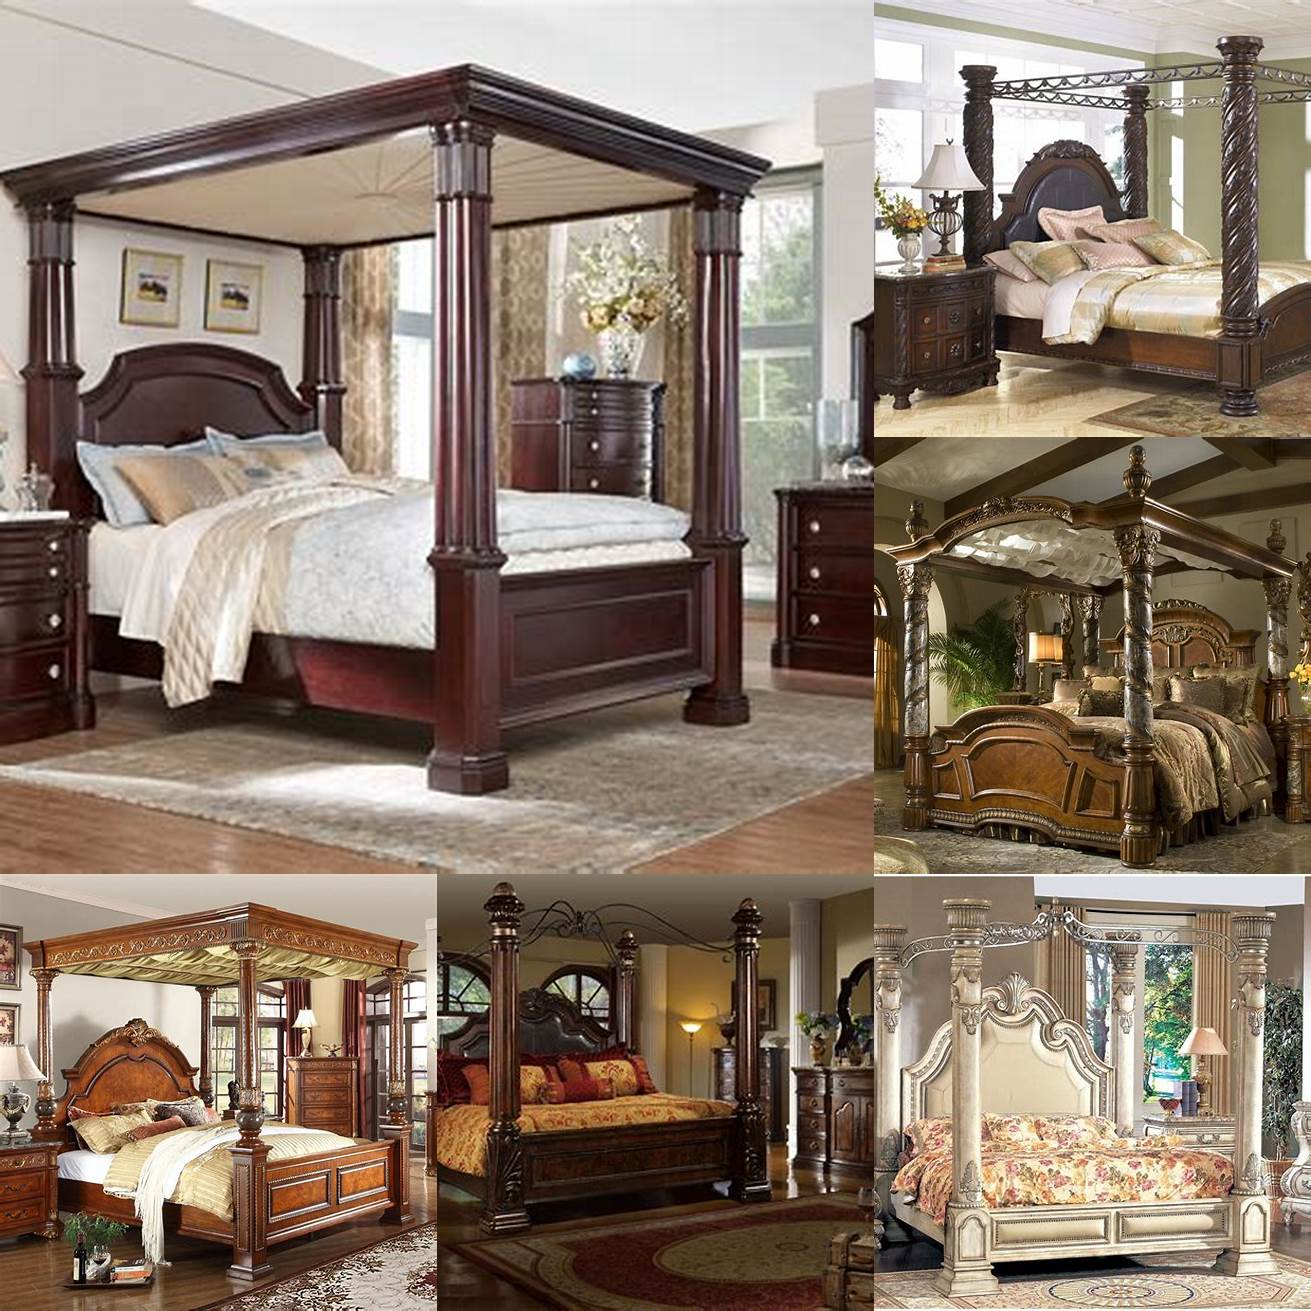 Canopy Bedroom Set with Matching Furniture